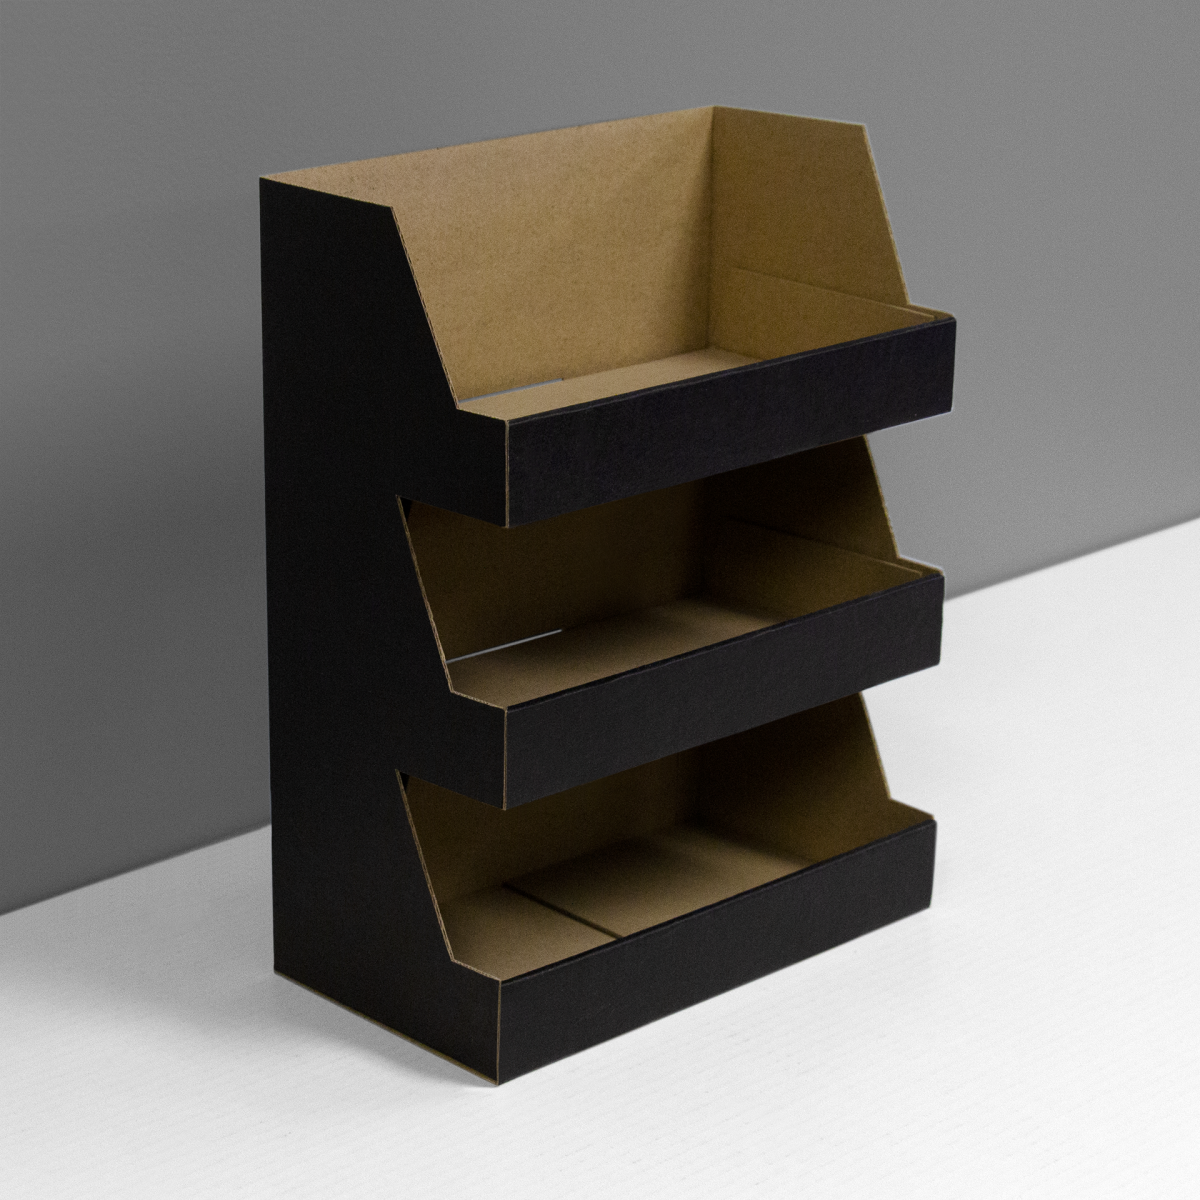 Cardboard counter display with 3 shelves - black